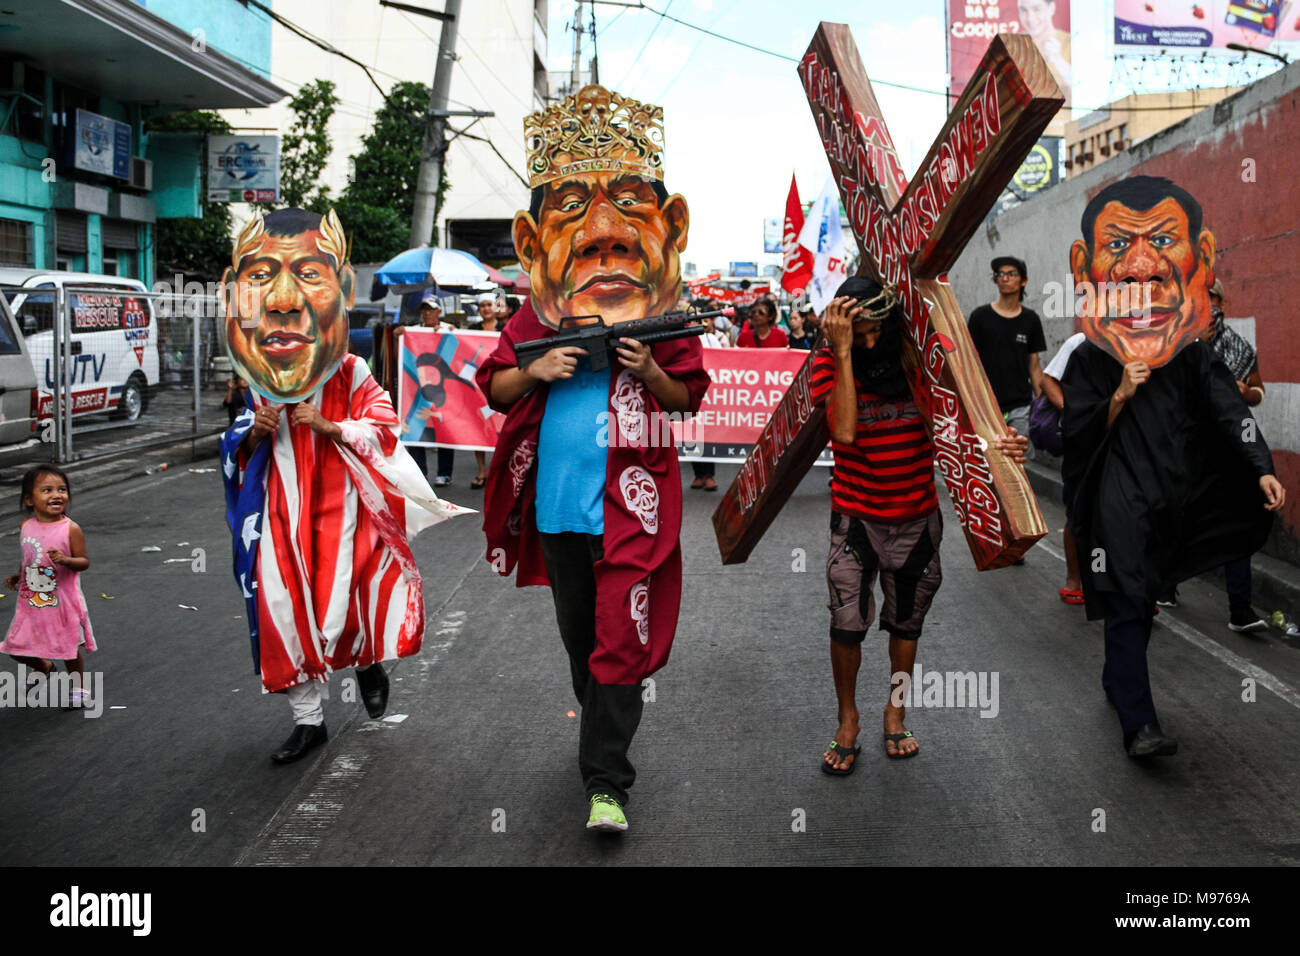 Manila, Philippines. 23rd March, 2018. A protester carries a cross while activists wearing several Duterte masks mock and hit him as they March towards Mendiola bridge in Manila. Activists slammed Duterte for the alleged double standard in his war on drugs, the crackdown on activists, and the recent designation of activists as terrorists according to the Malacanang. The March was held a few days before the Holy Week, with protesters carrying a cross to Mendiola, Manila. Credit: SOPA Images Limited/Alamy Live News Stock Photo